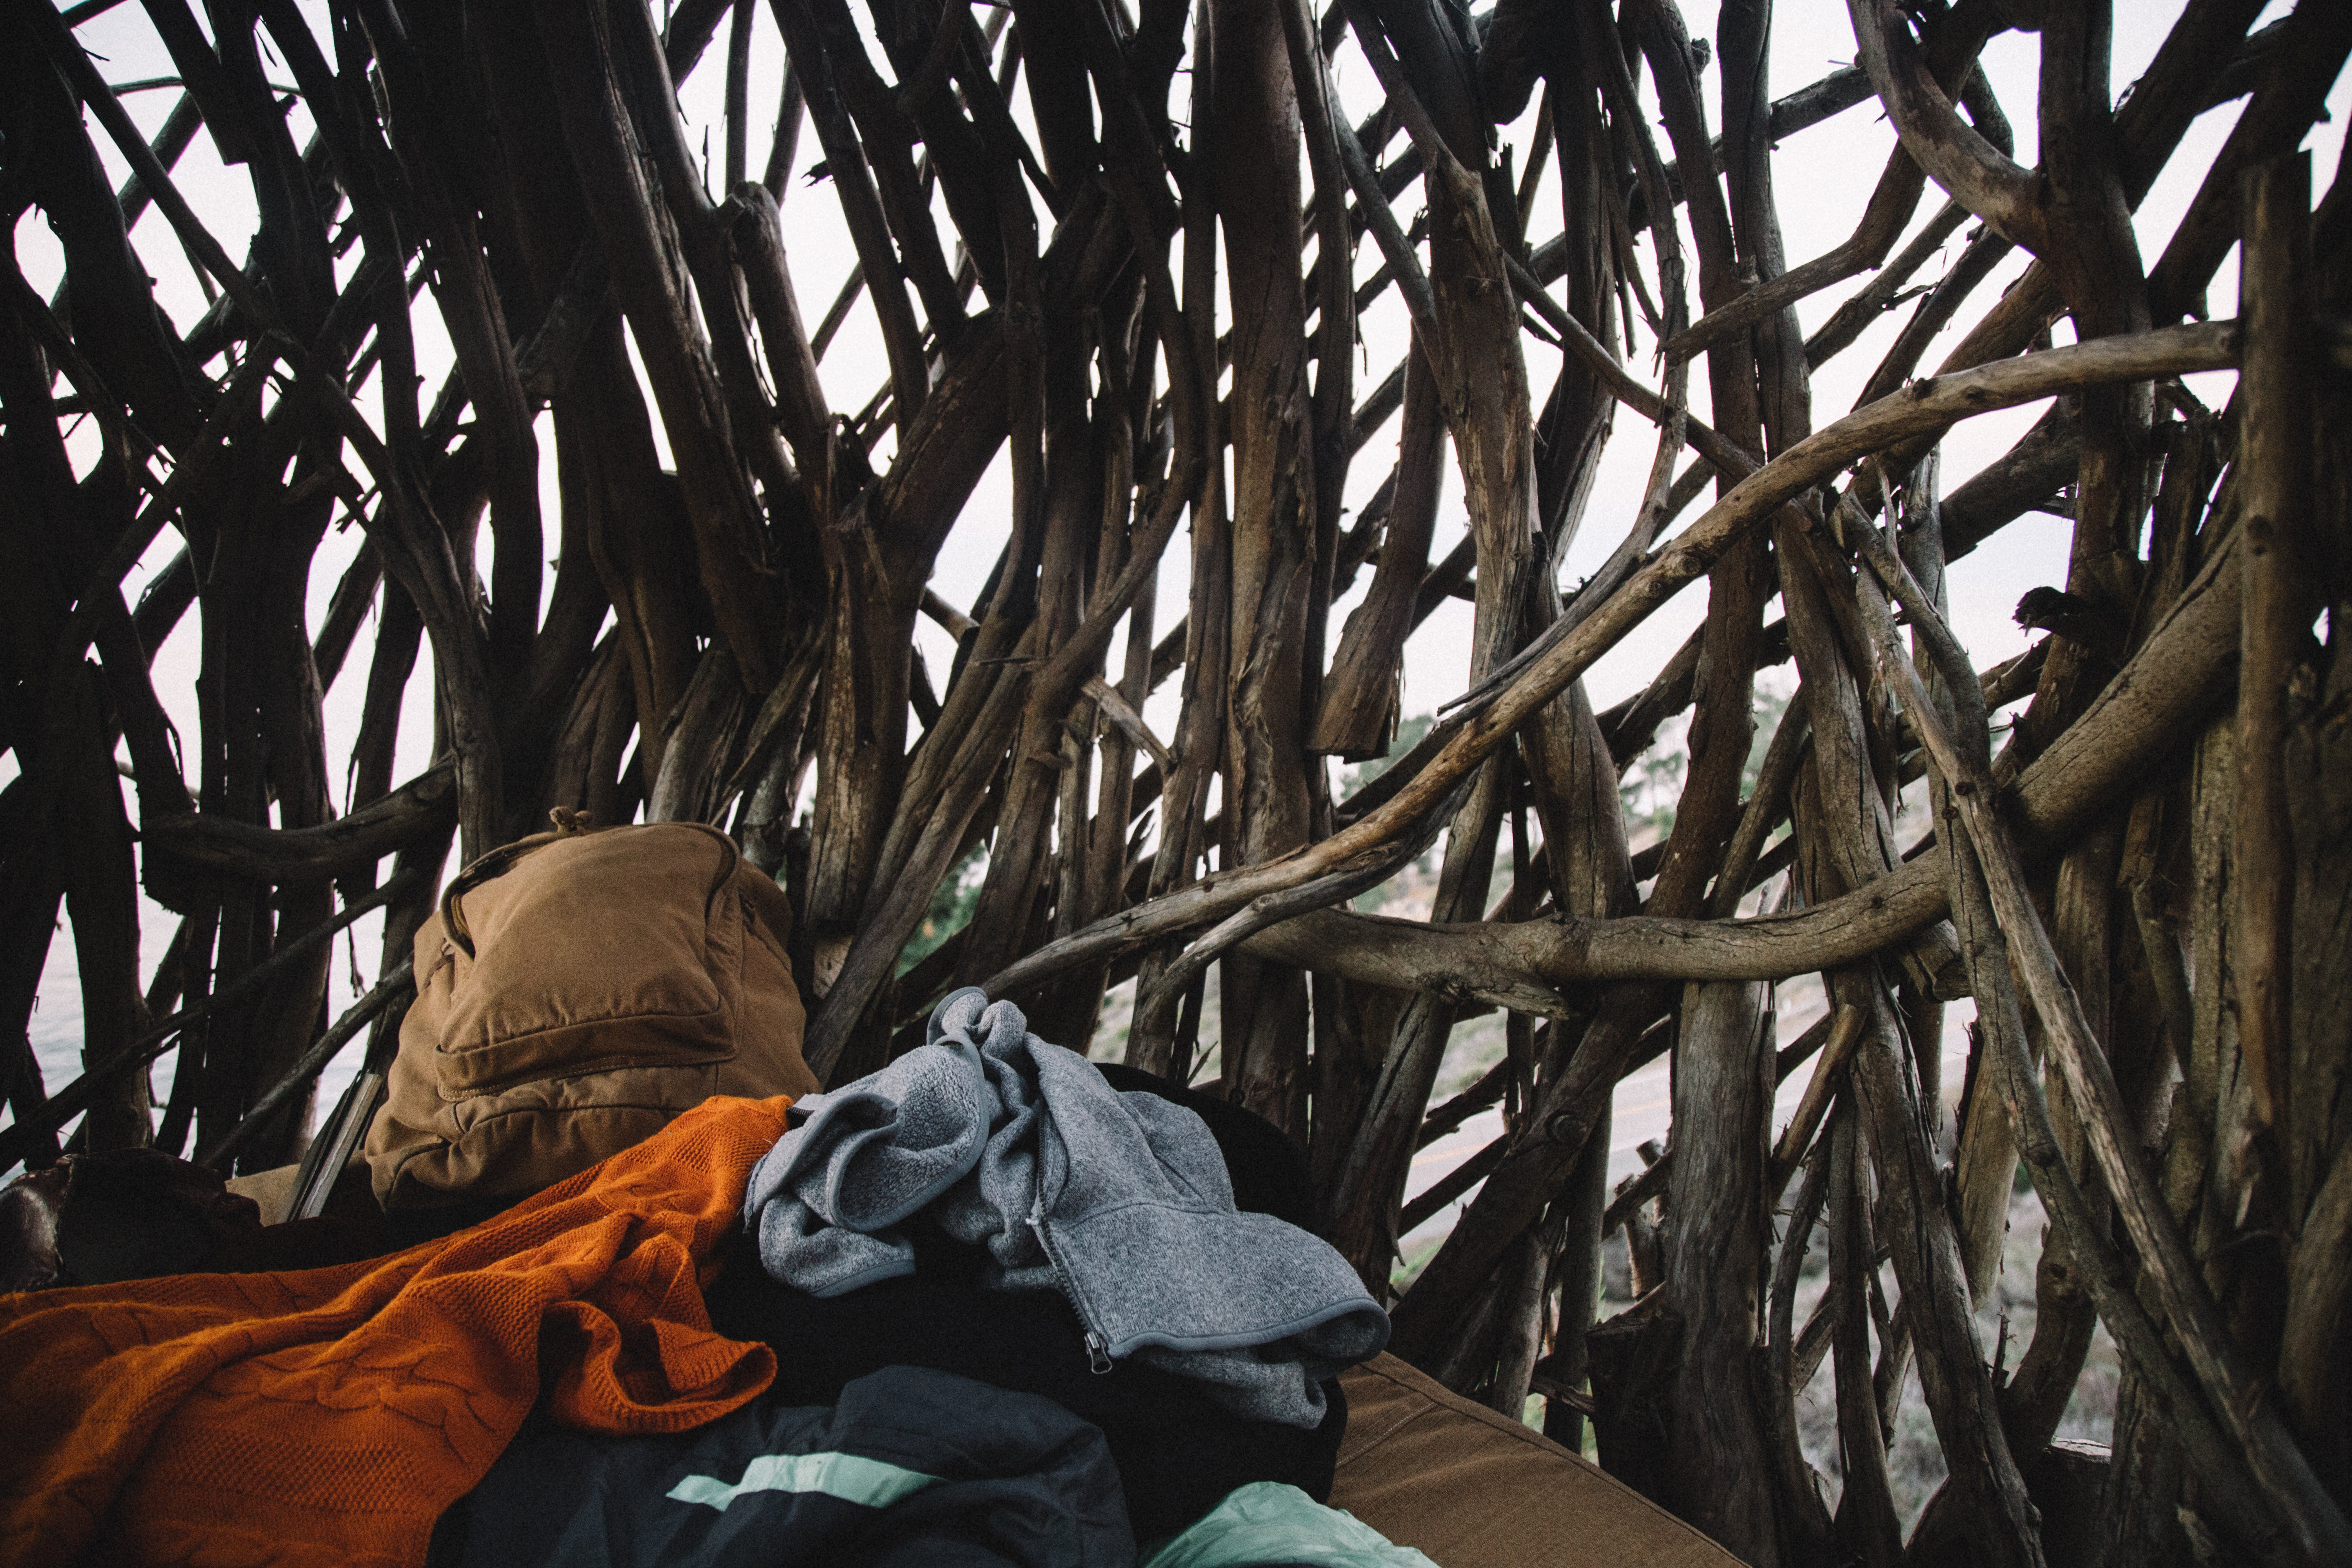 This Insta-Worthy Road Trip To Sleep in a Human Nest is Everything
